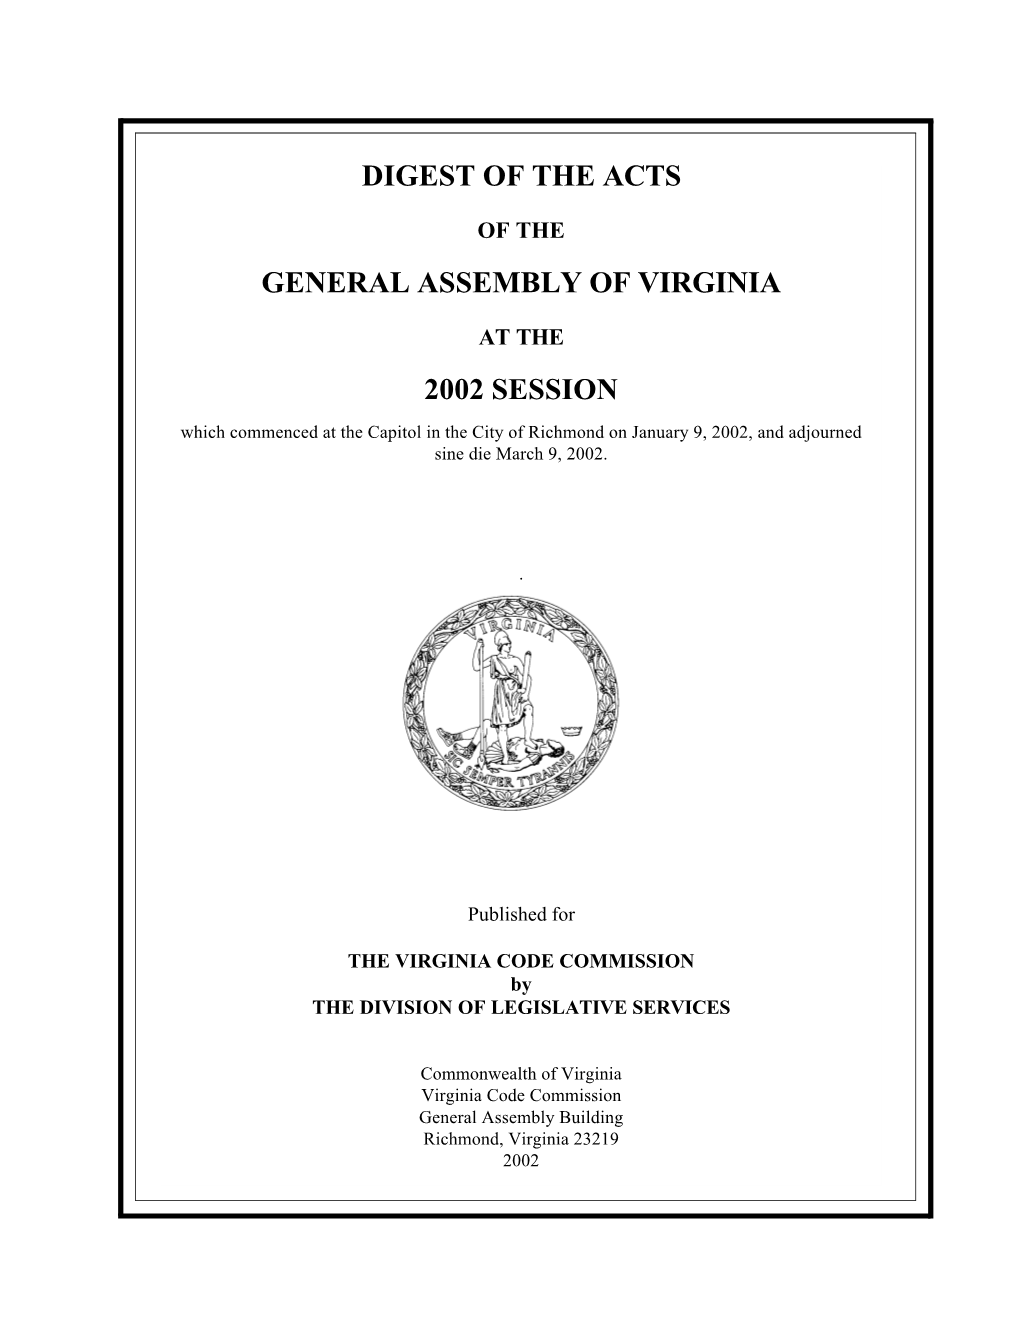 2002 Digest of the Acts of the General Assembly of Virginia